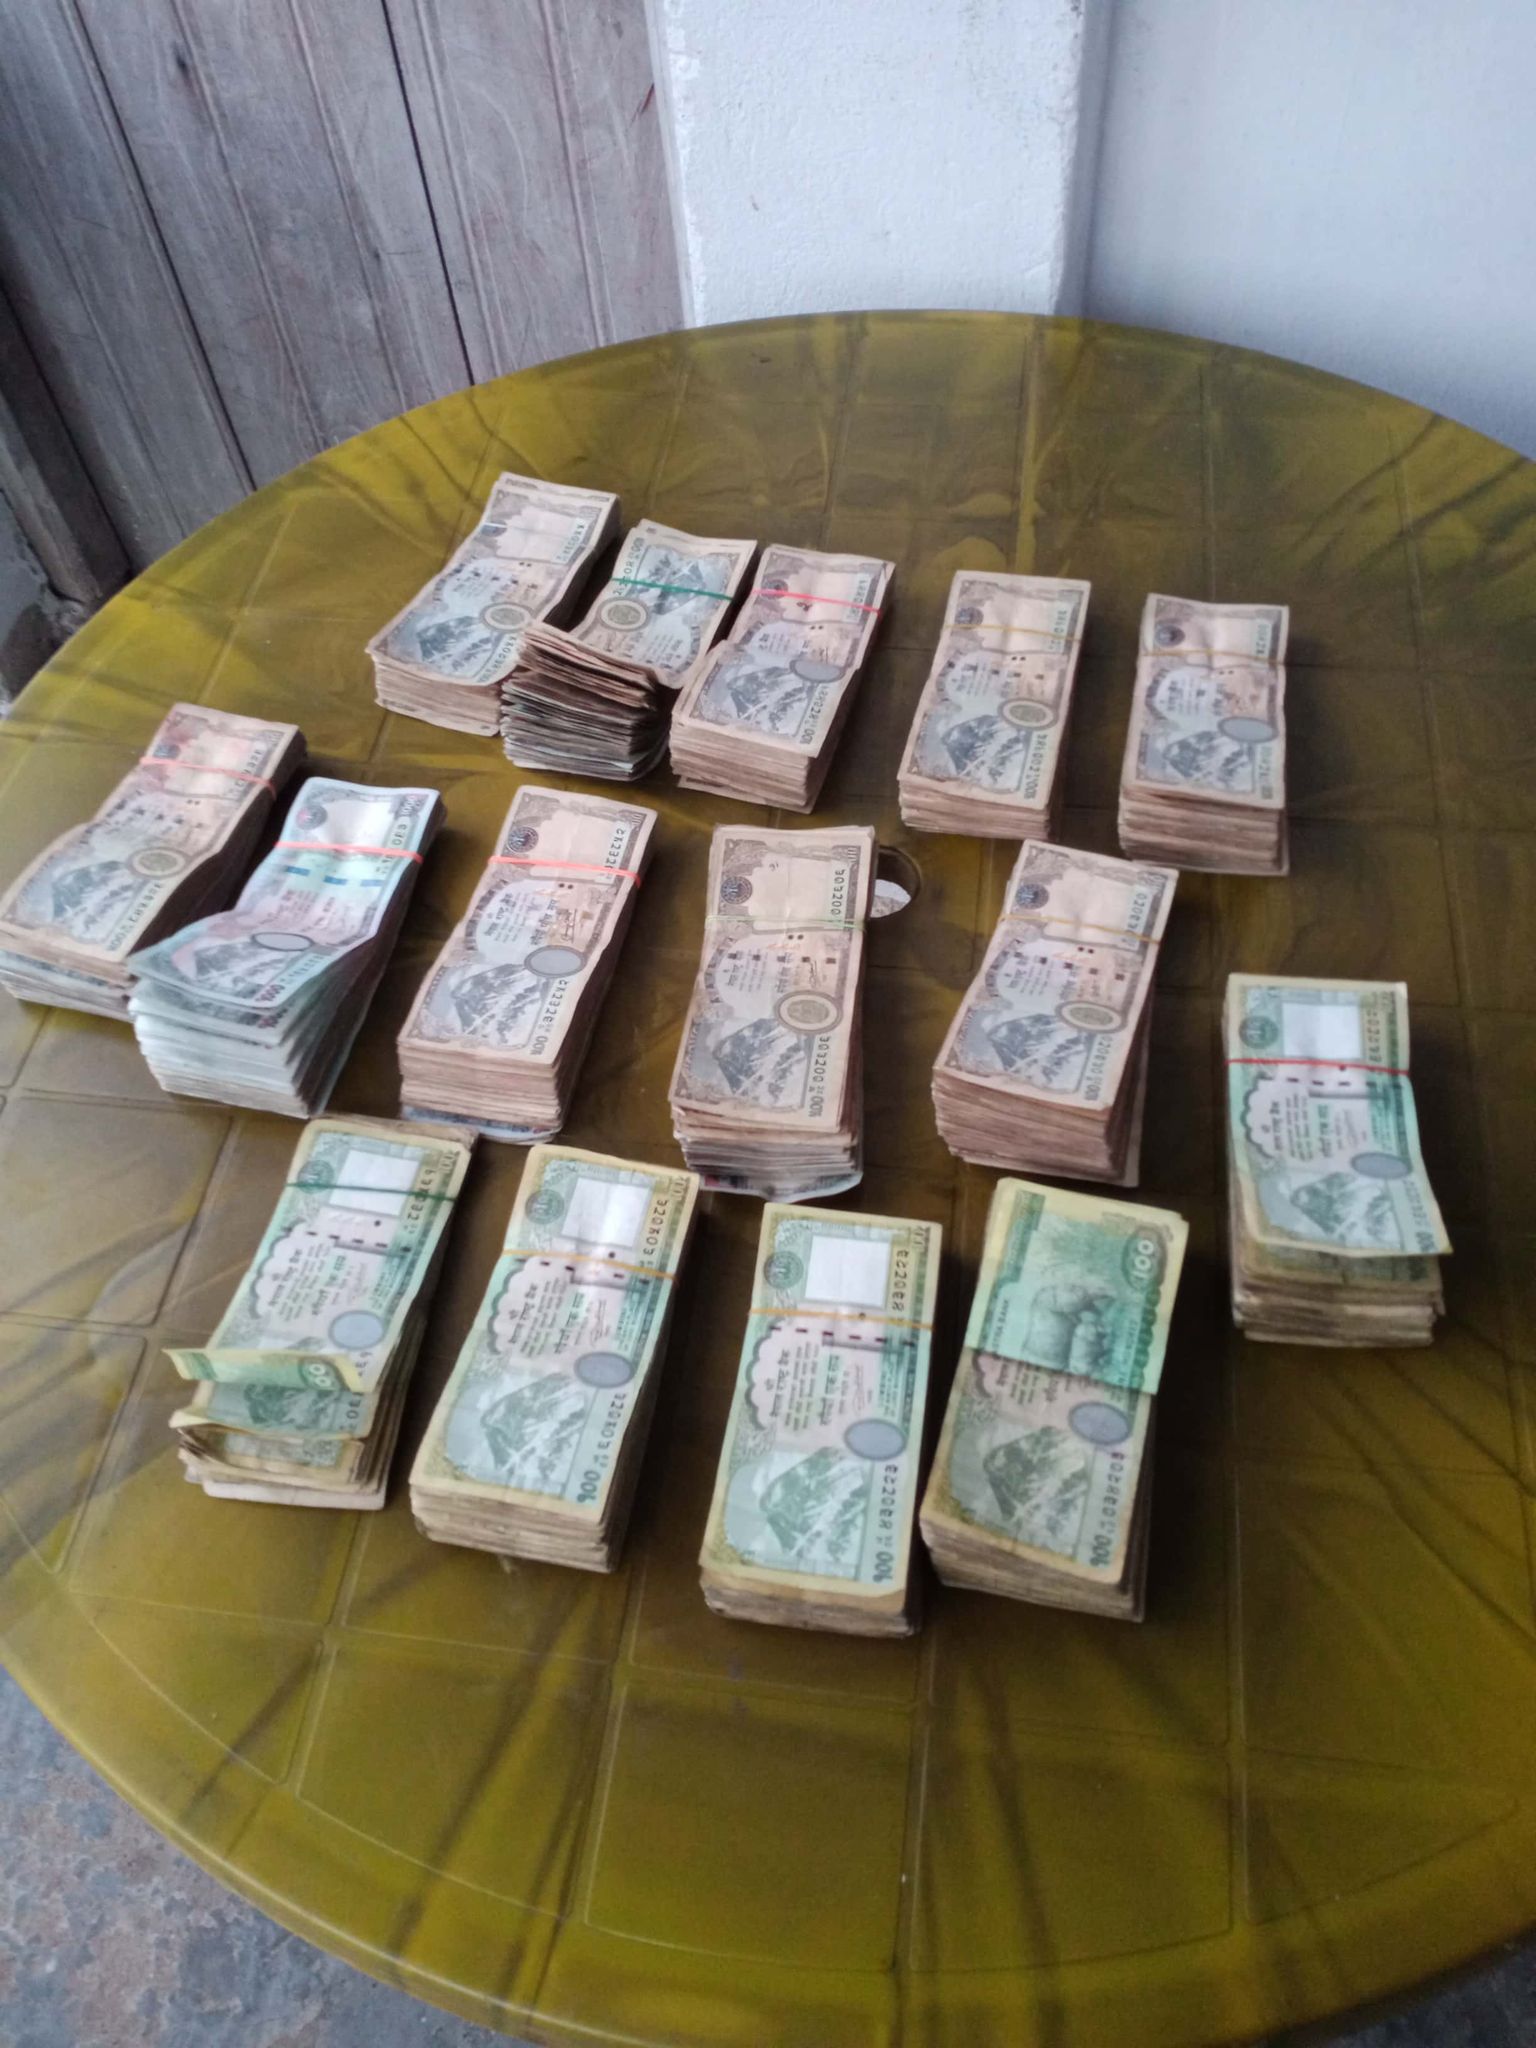 4.8 million rupees recovered from a woman going to Bhairahawa